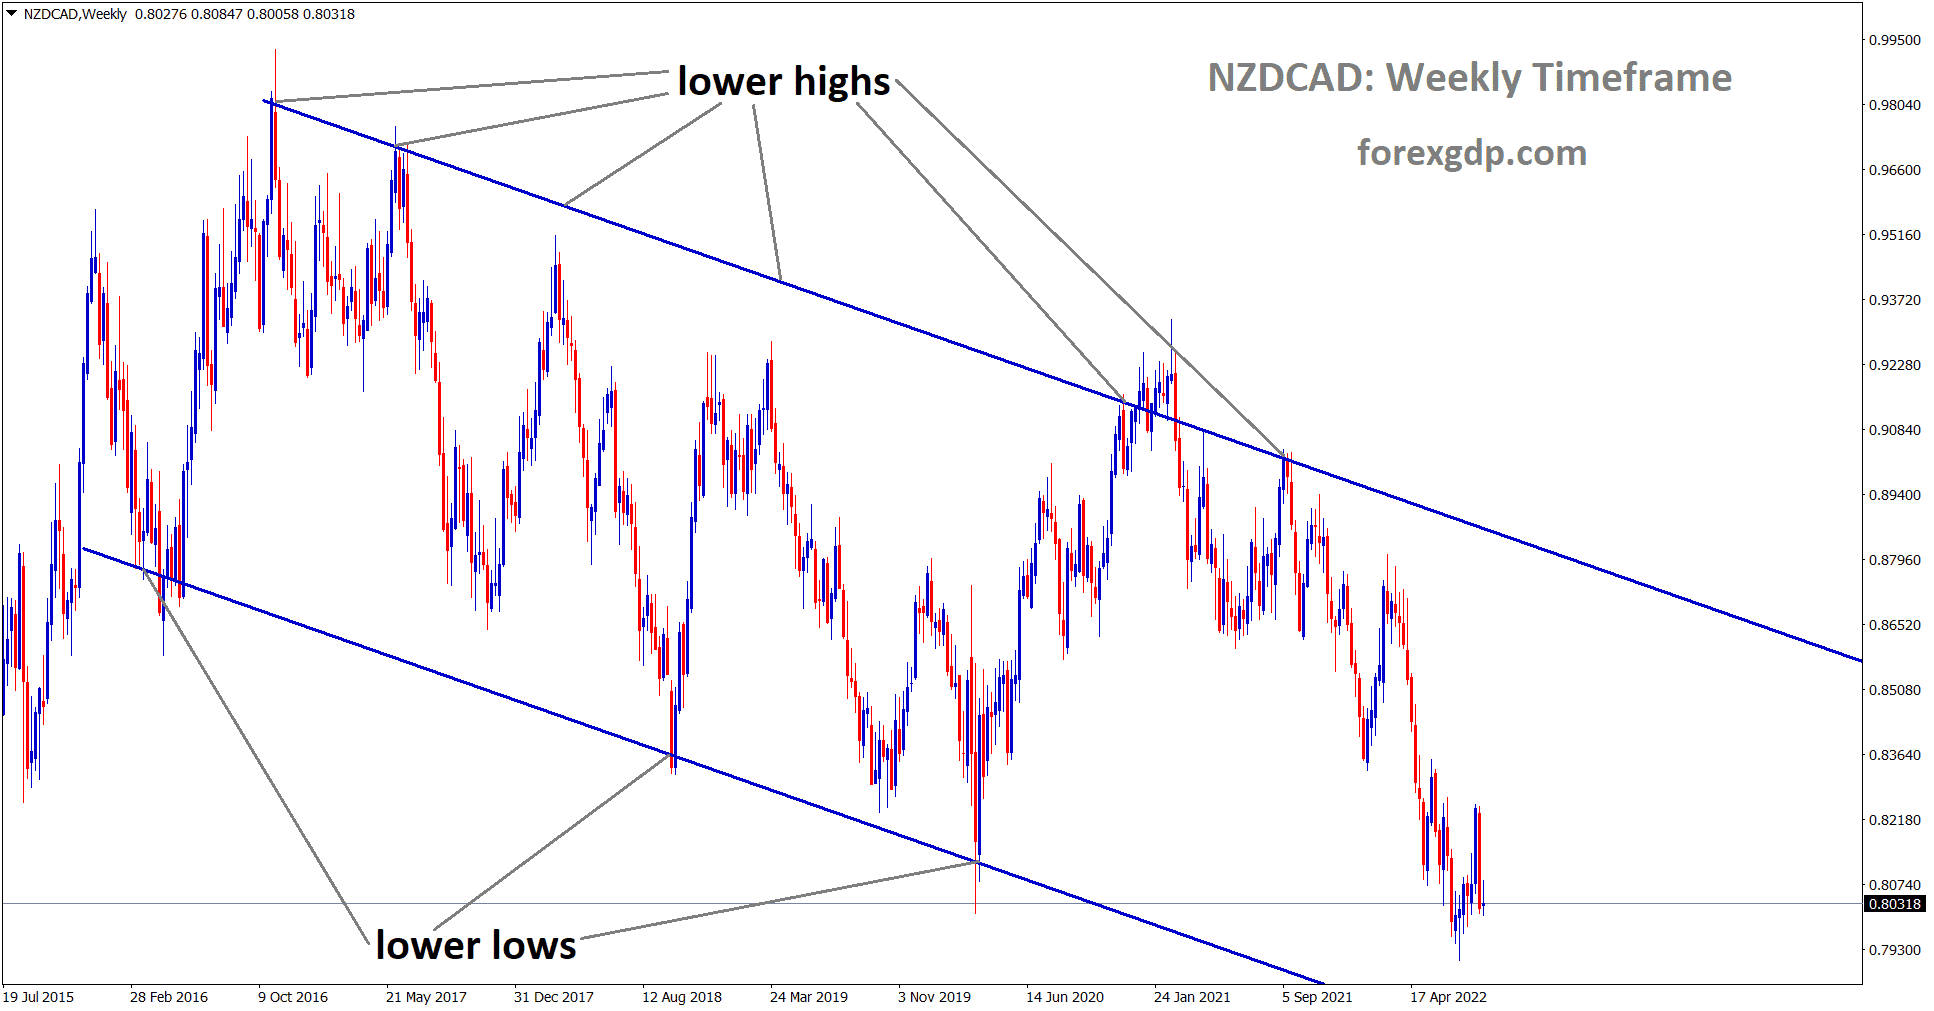 NZDCAD is moving in the Descending channel.